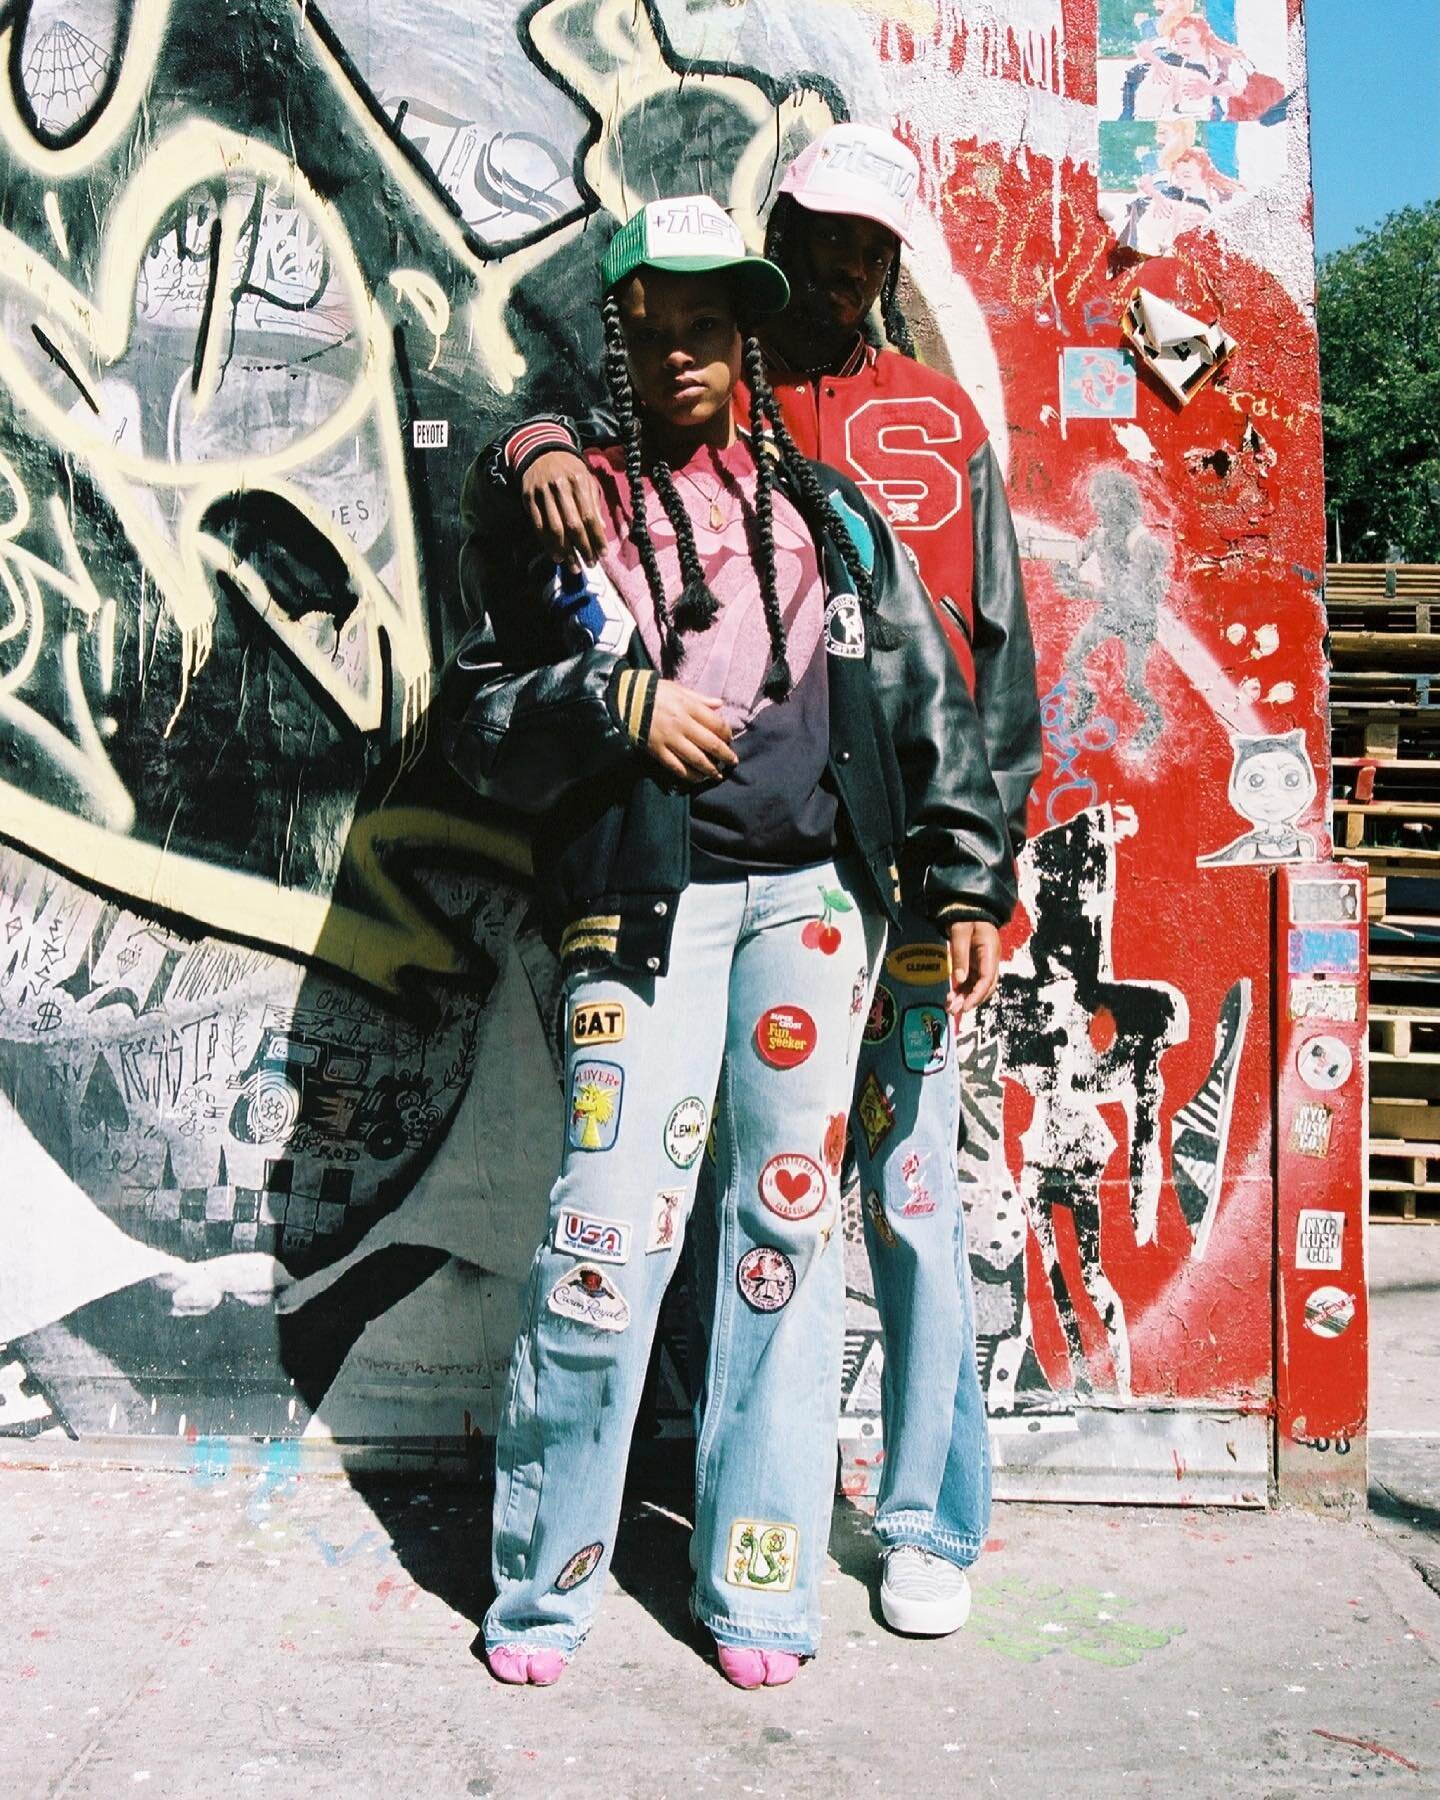 Lower East Side Bonnie and Clyde 

@sanauvanique and @_swank_sinatra for @guitarboyarchive 

Creative Director- @tokyocorleone 
Photographer- @rosegoldreese 
Stylist- @tokyocorleone 
Models- @sanauvanique @_swank_sinatra 

Female Model Look 

Outfit-